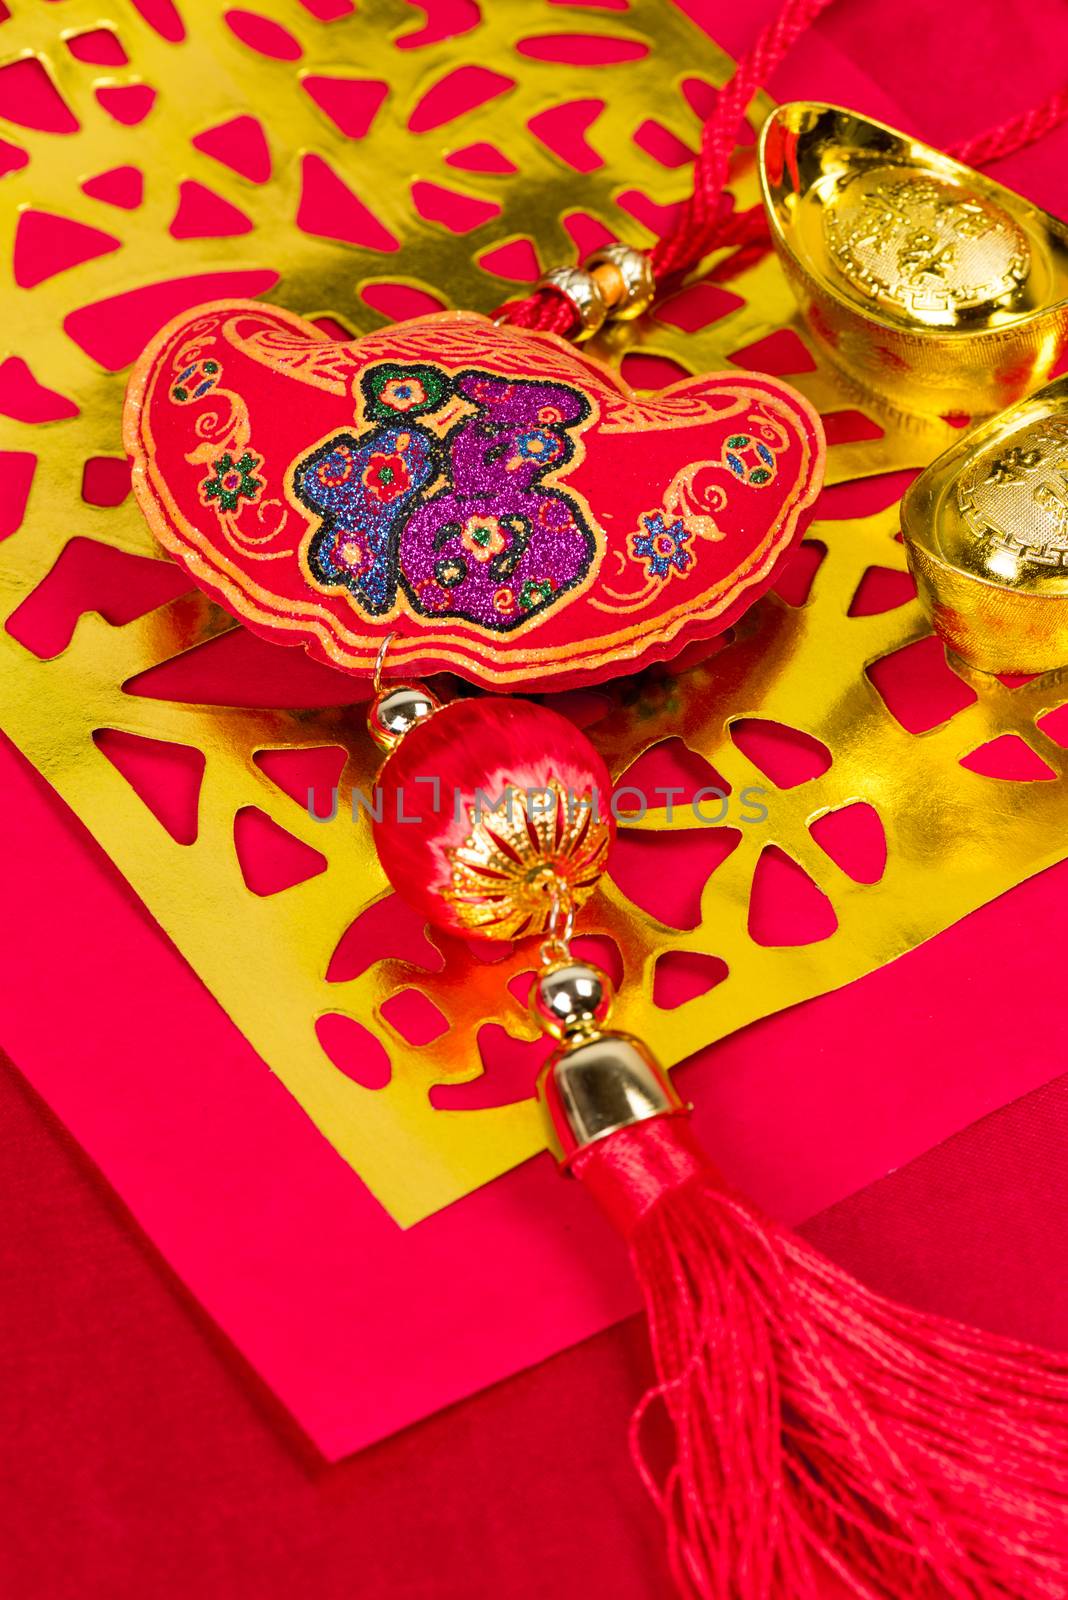 chinese new year (lunar new year) festival decorations